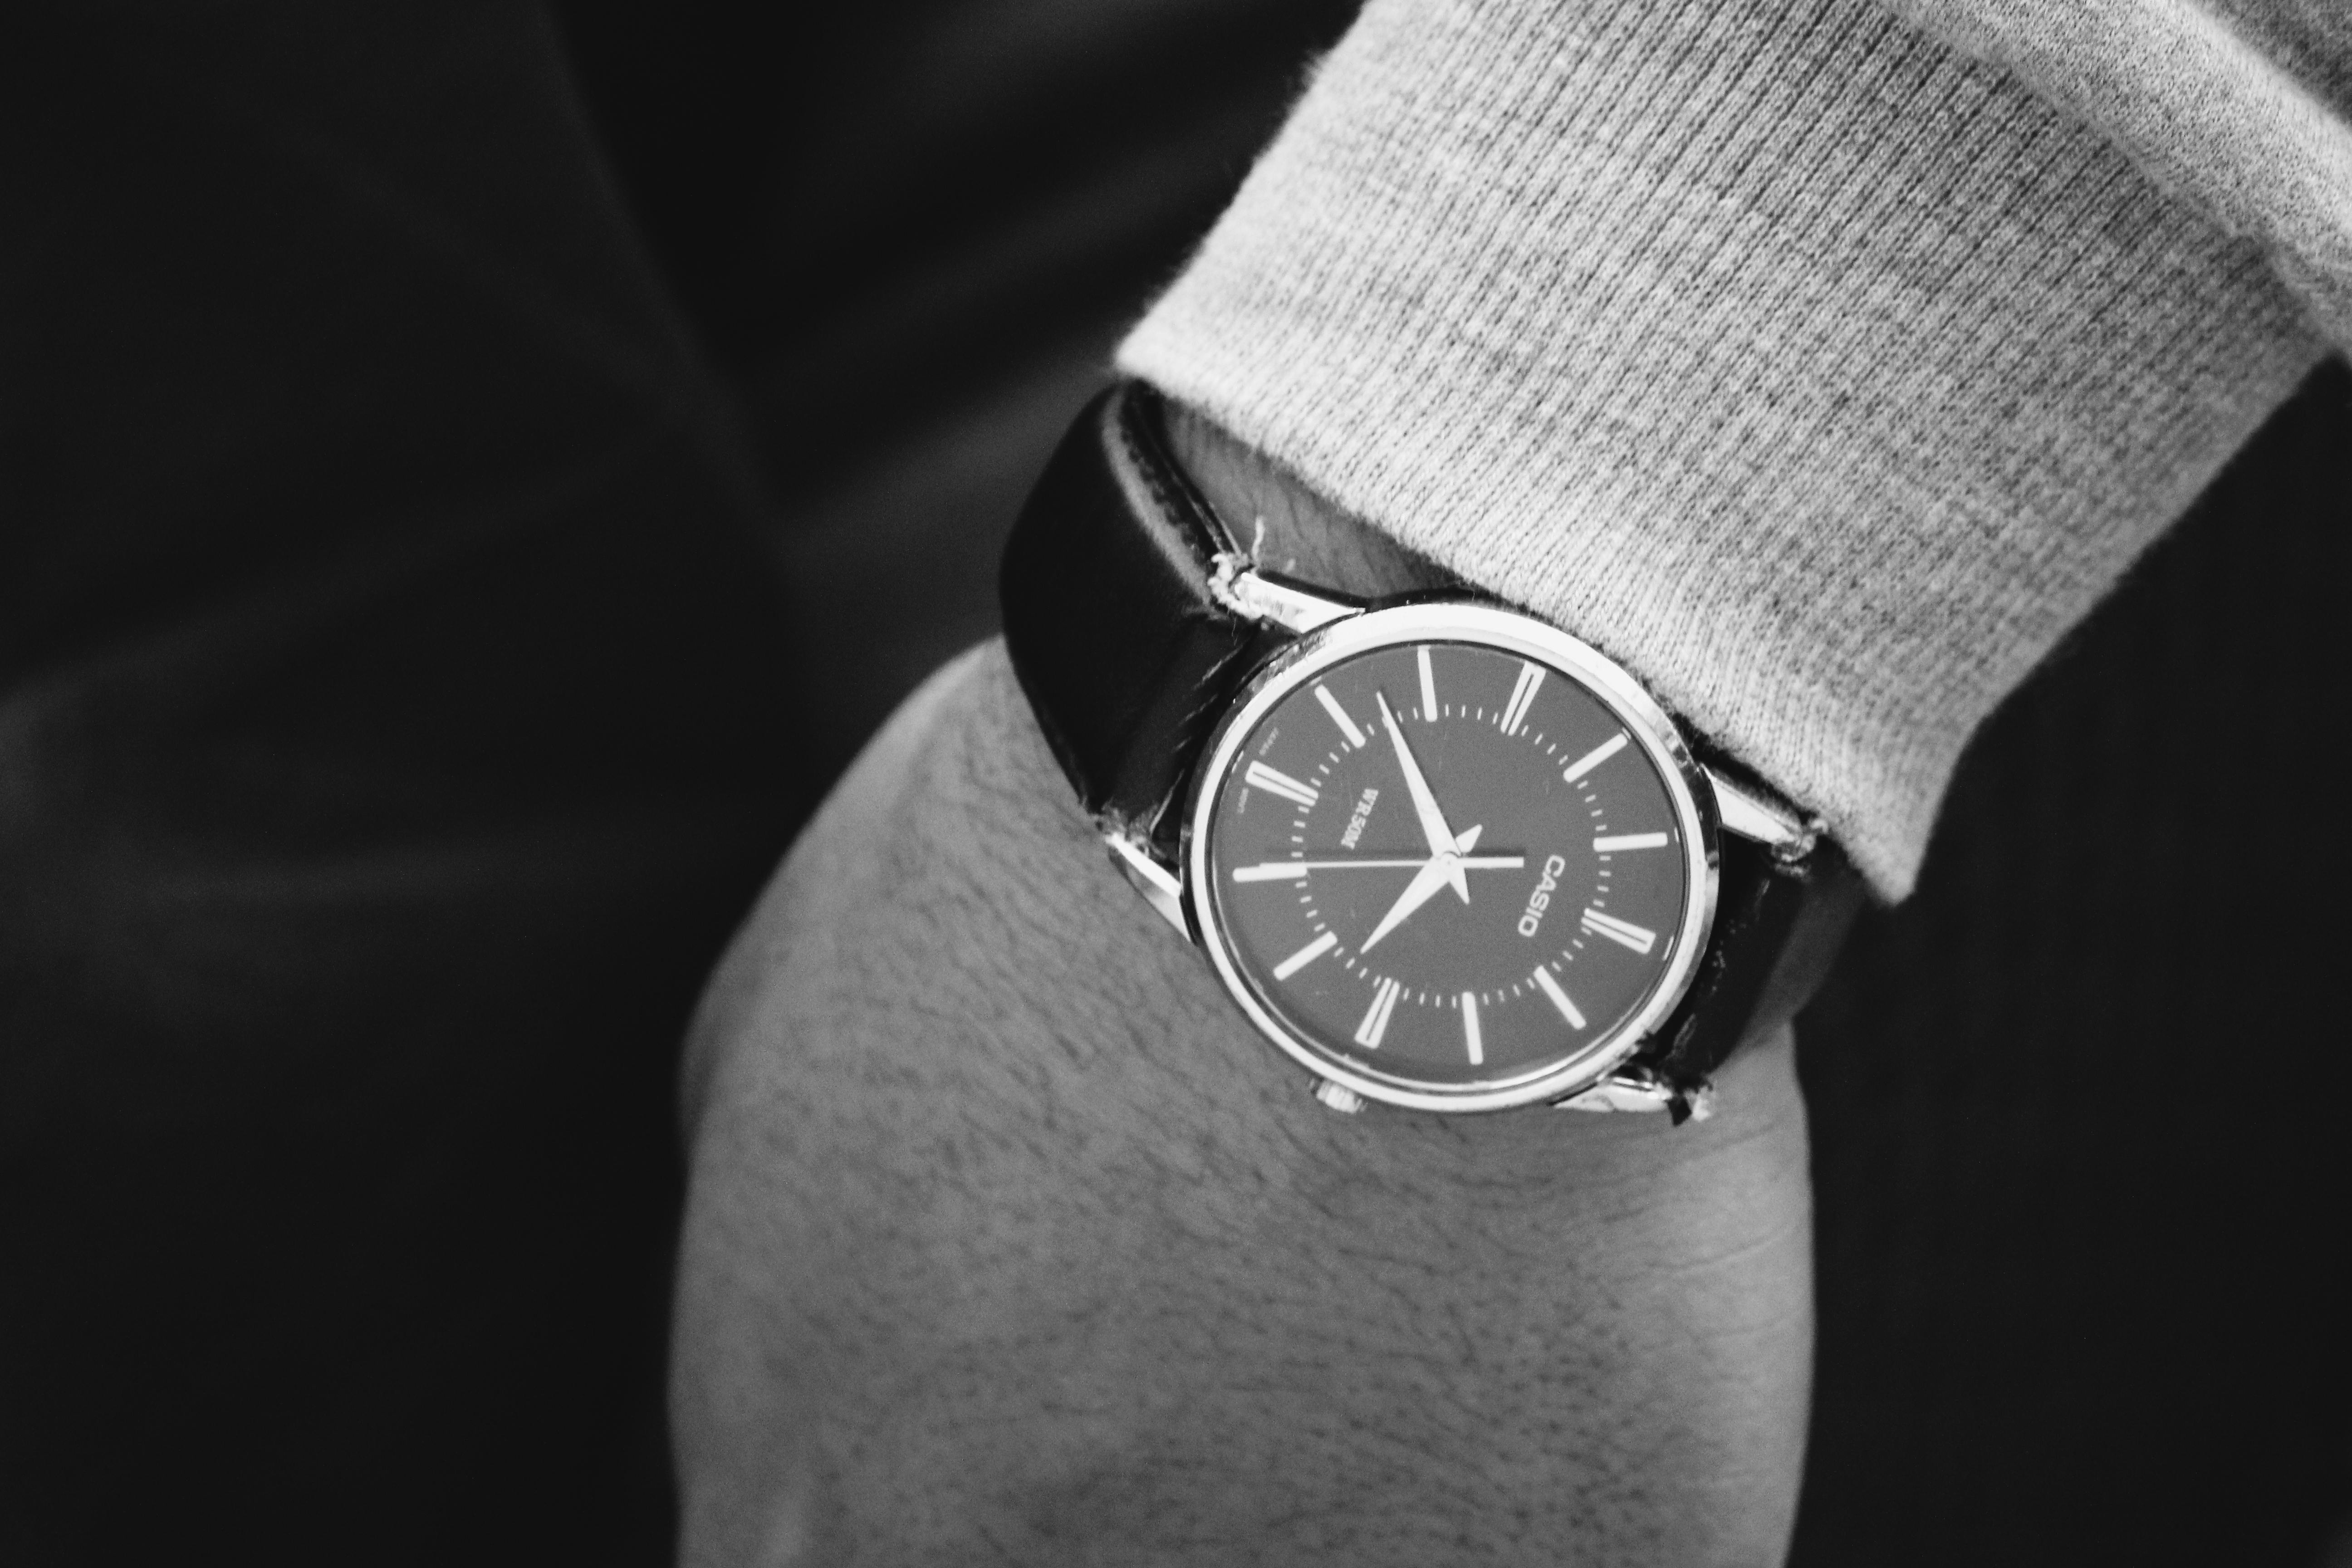 Person Showing Watch · Free Stock Photo - 5184 x 3456 jpeg 1992kB